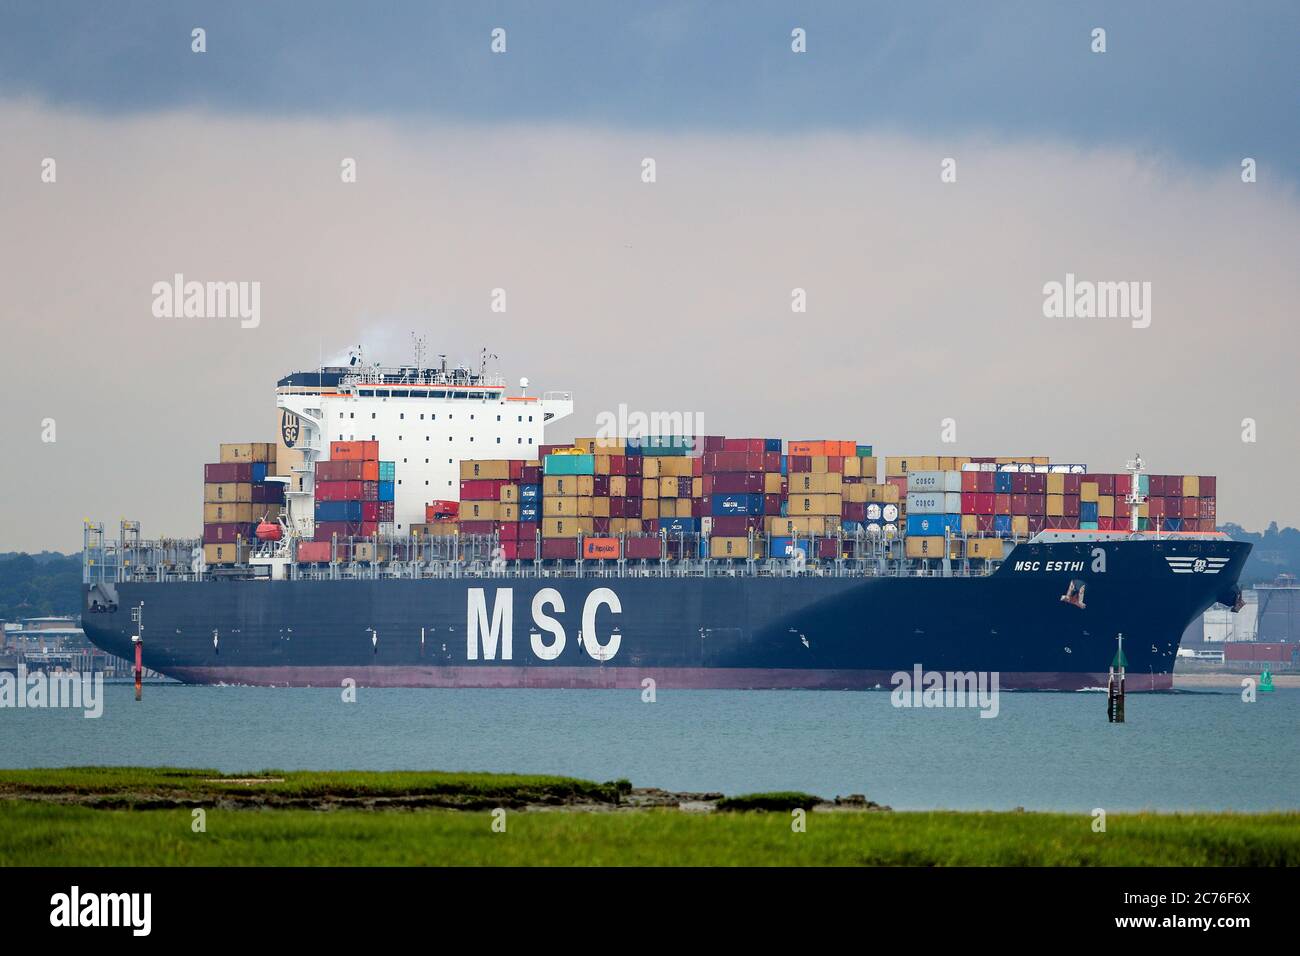 MSC Esthi container ship pictured leaving Southampton Docks Stock Photo